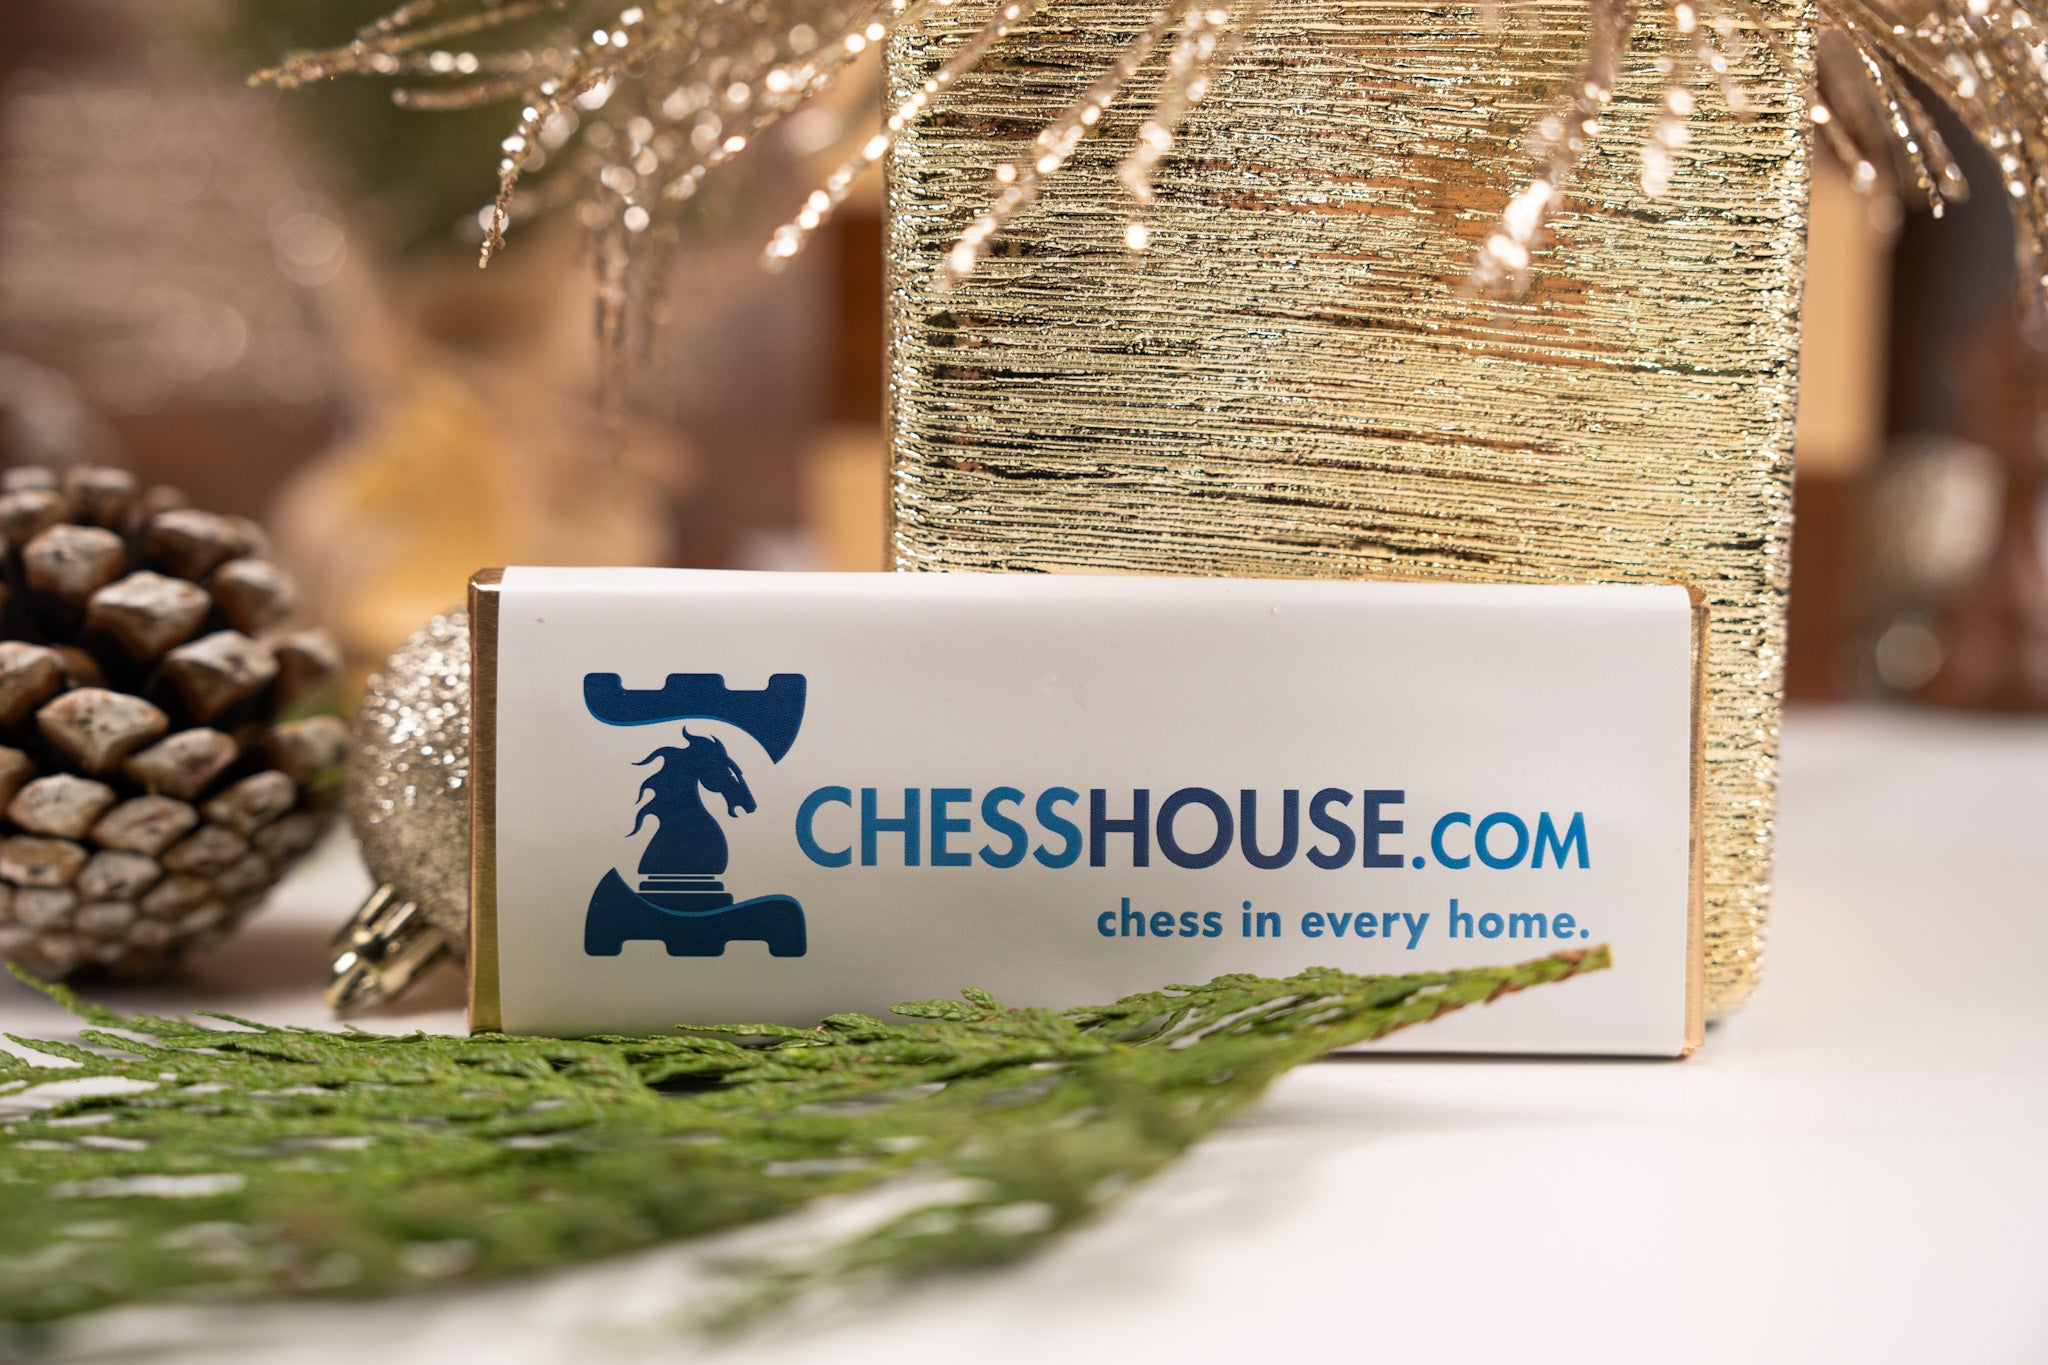 2023 Black Friday Chess Deals by CHESS HOUSE – Chess House